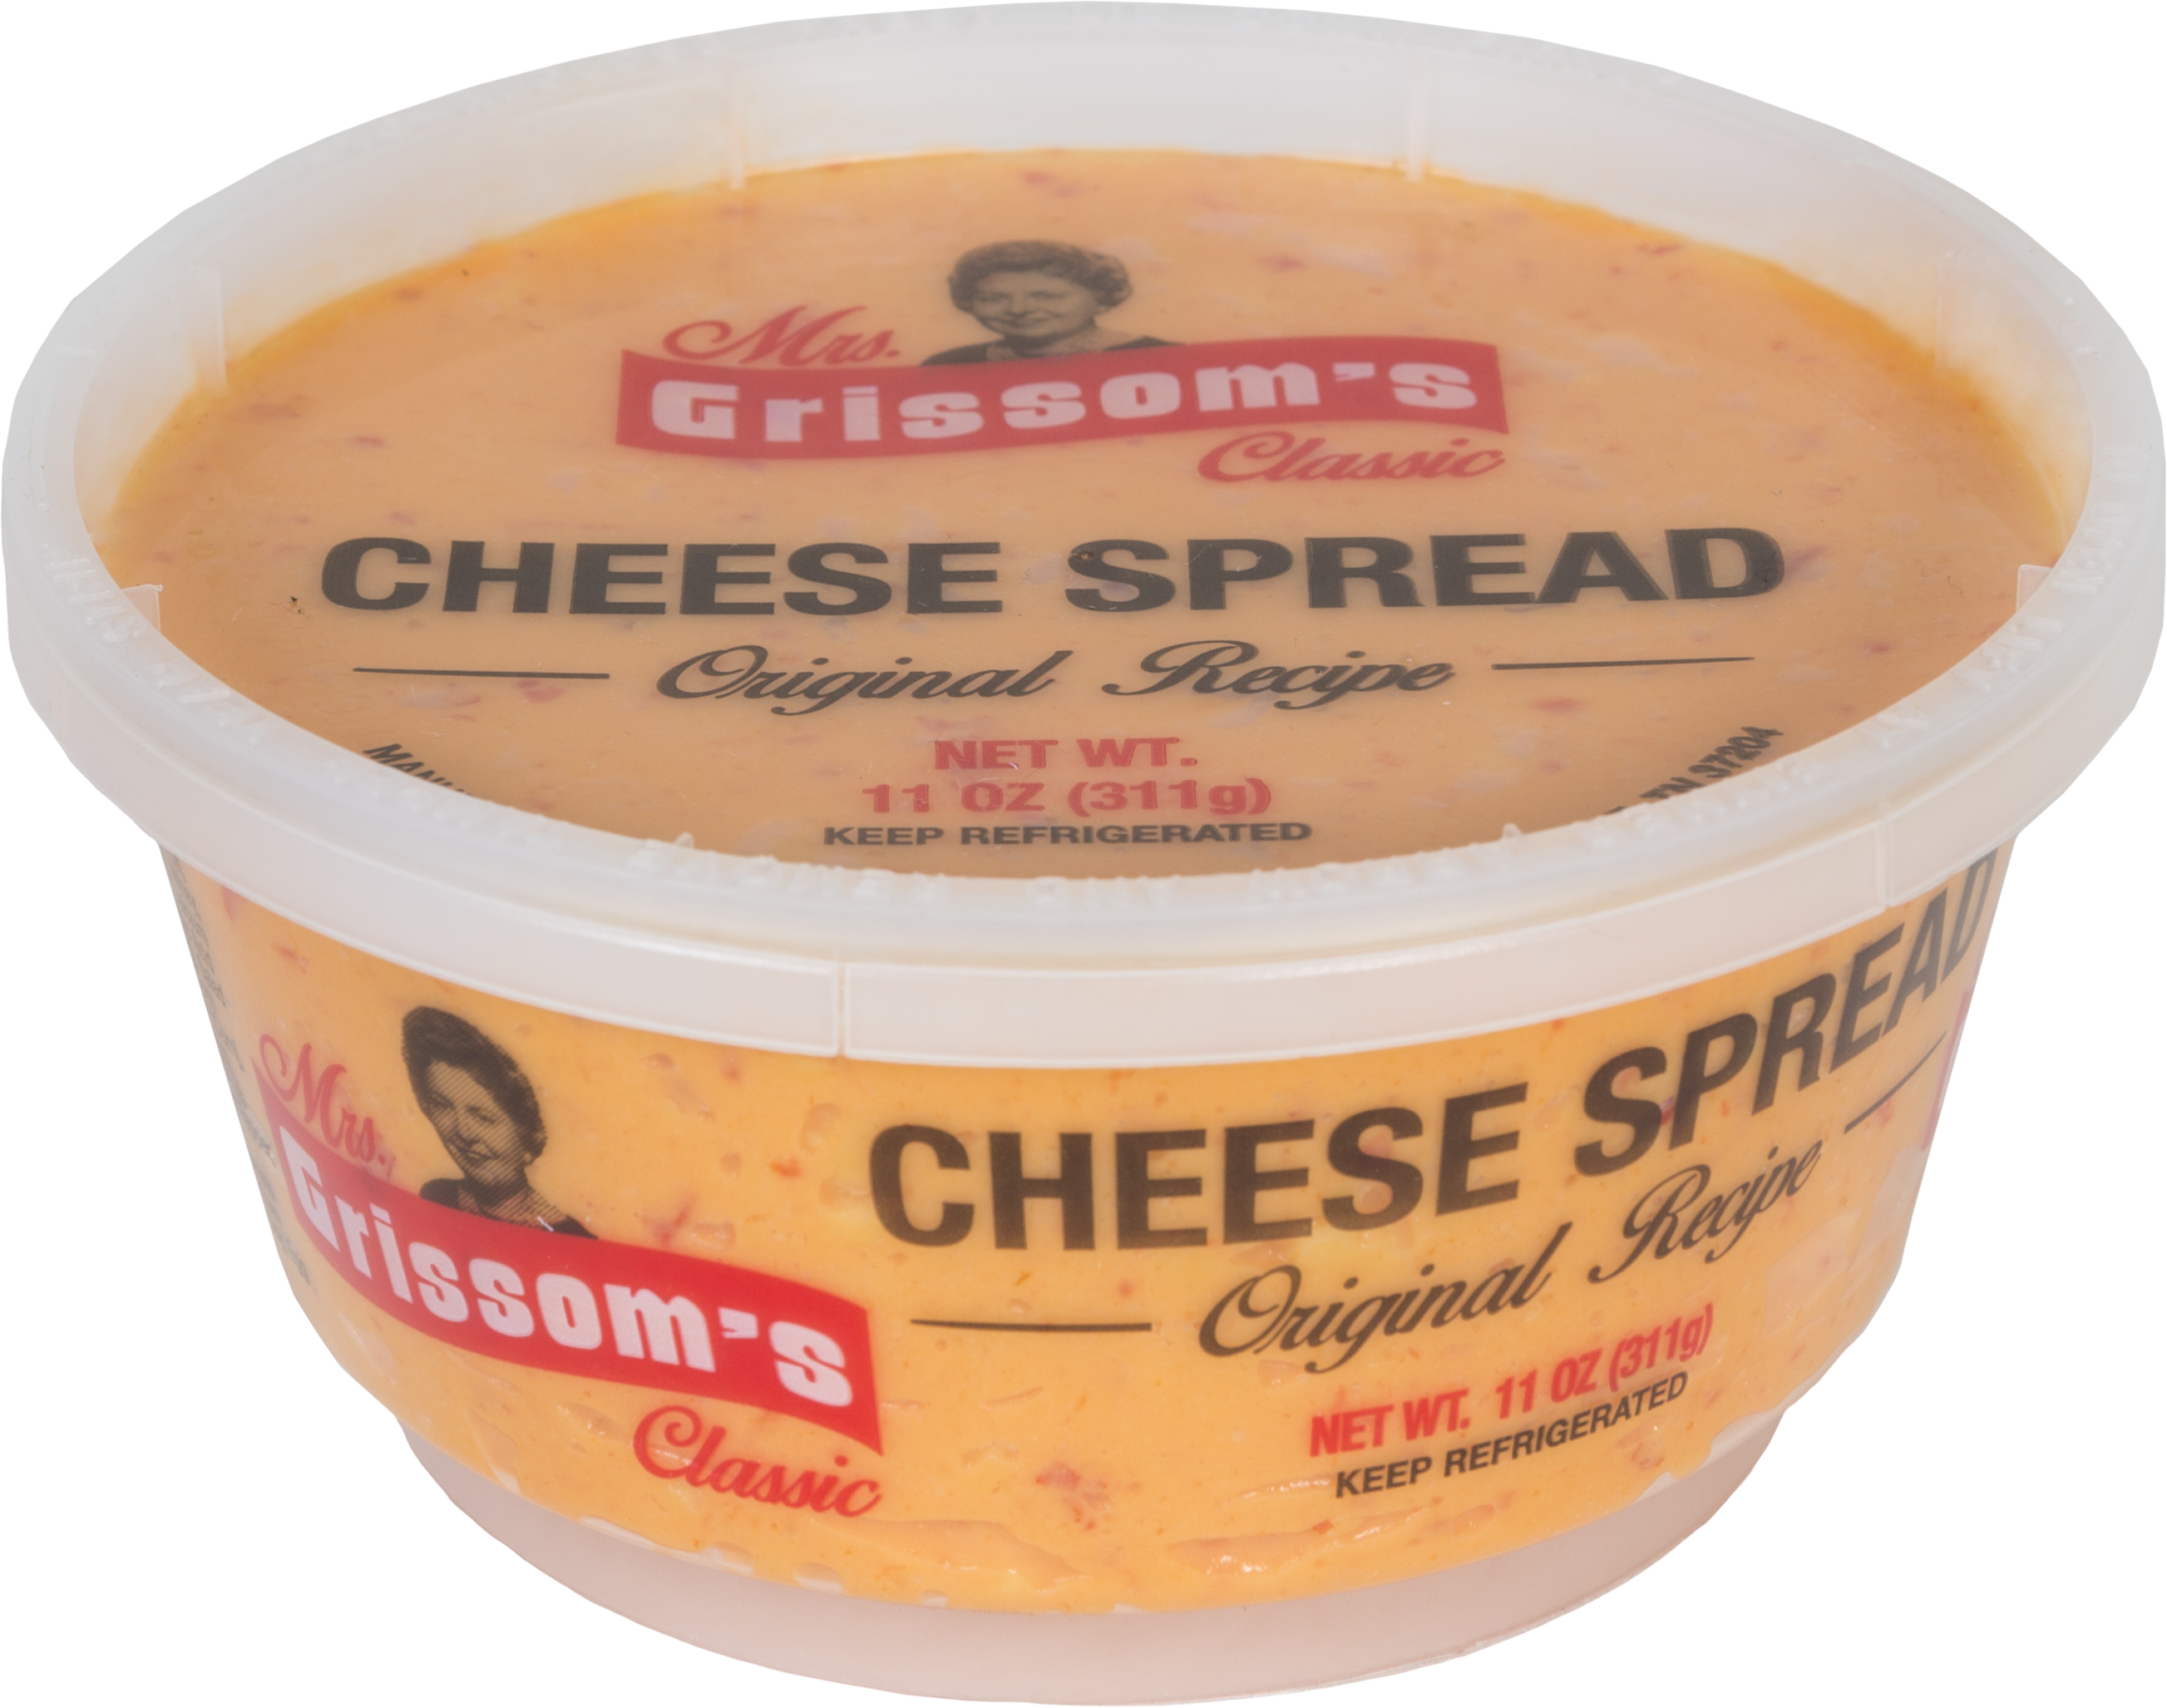 Mrs Grissoms Cheese Spread